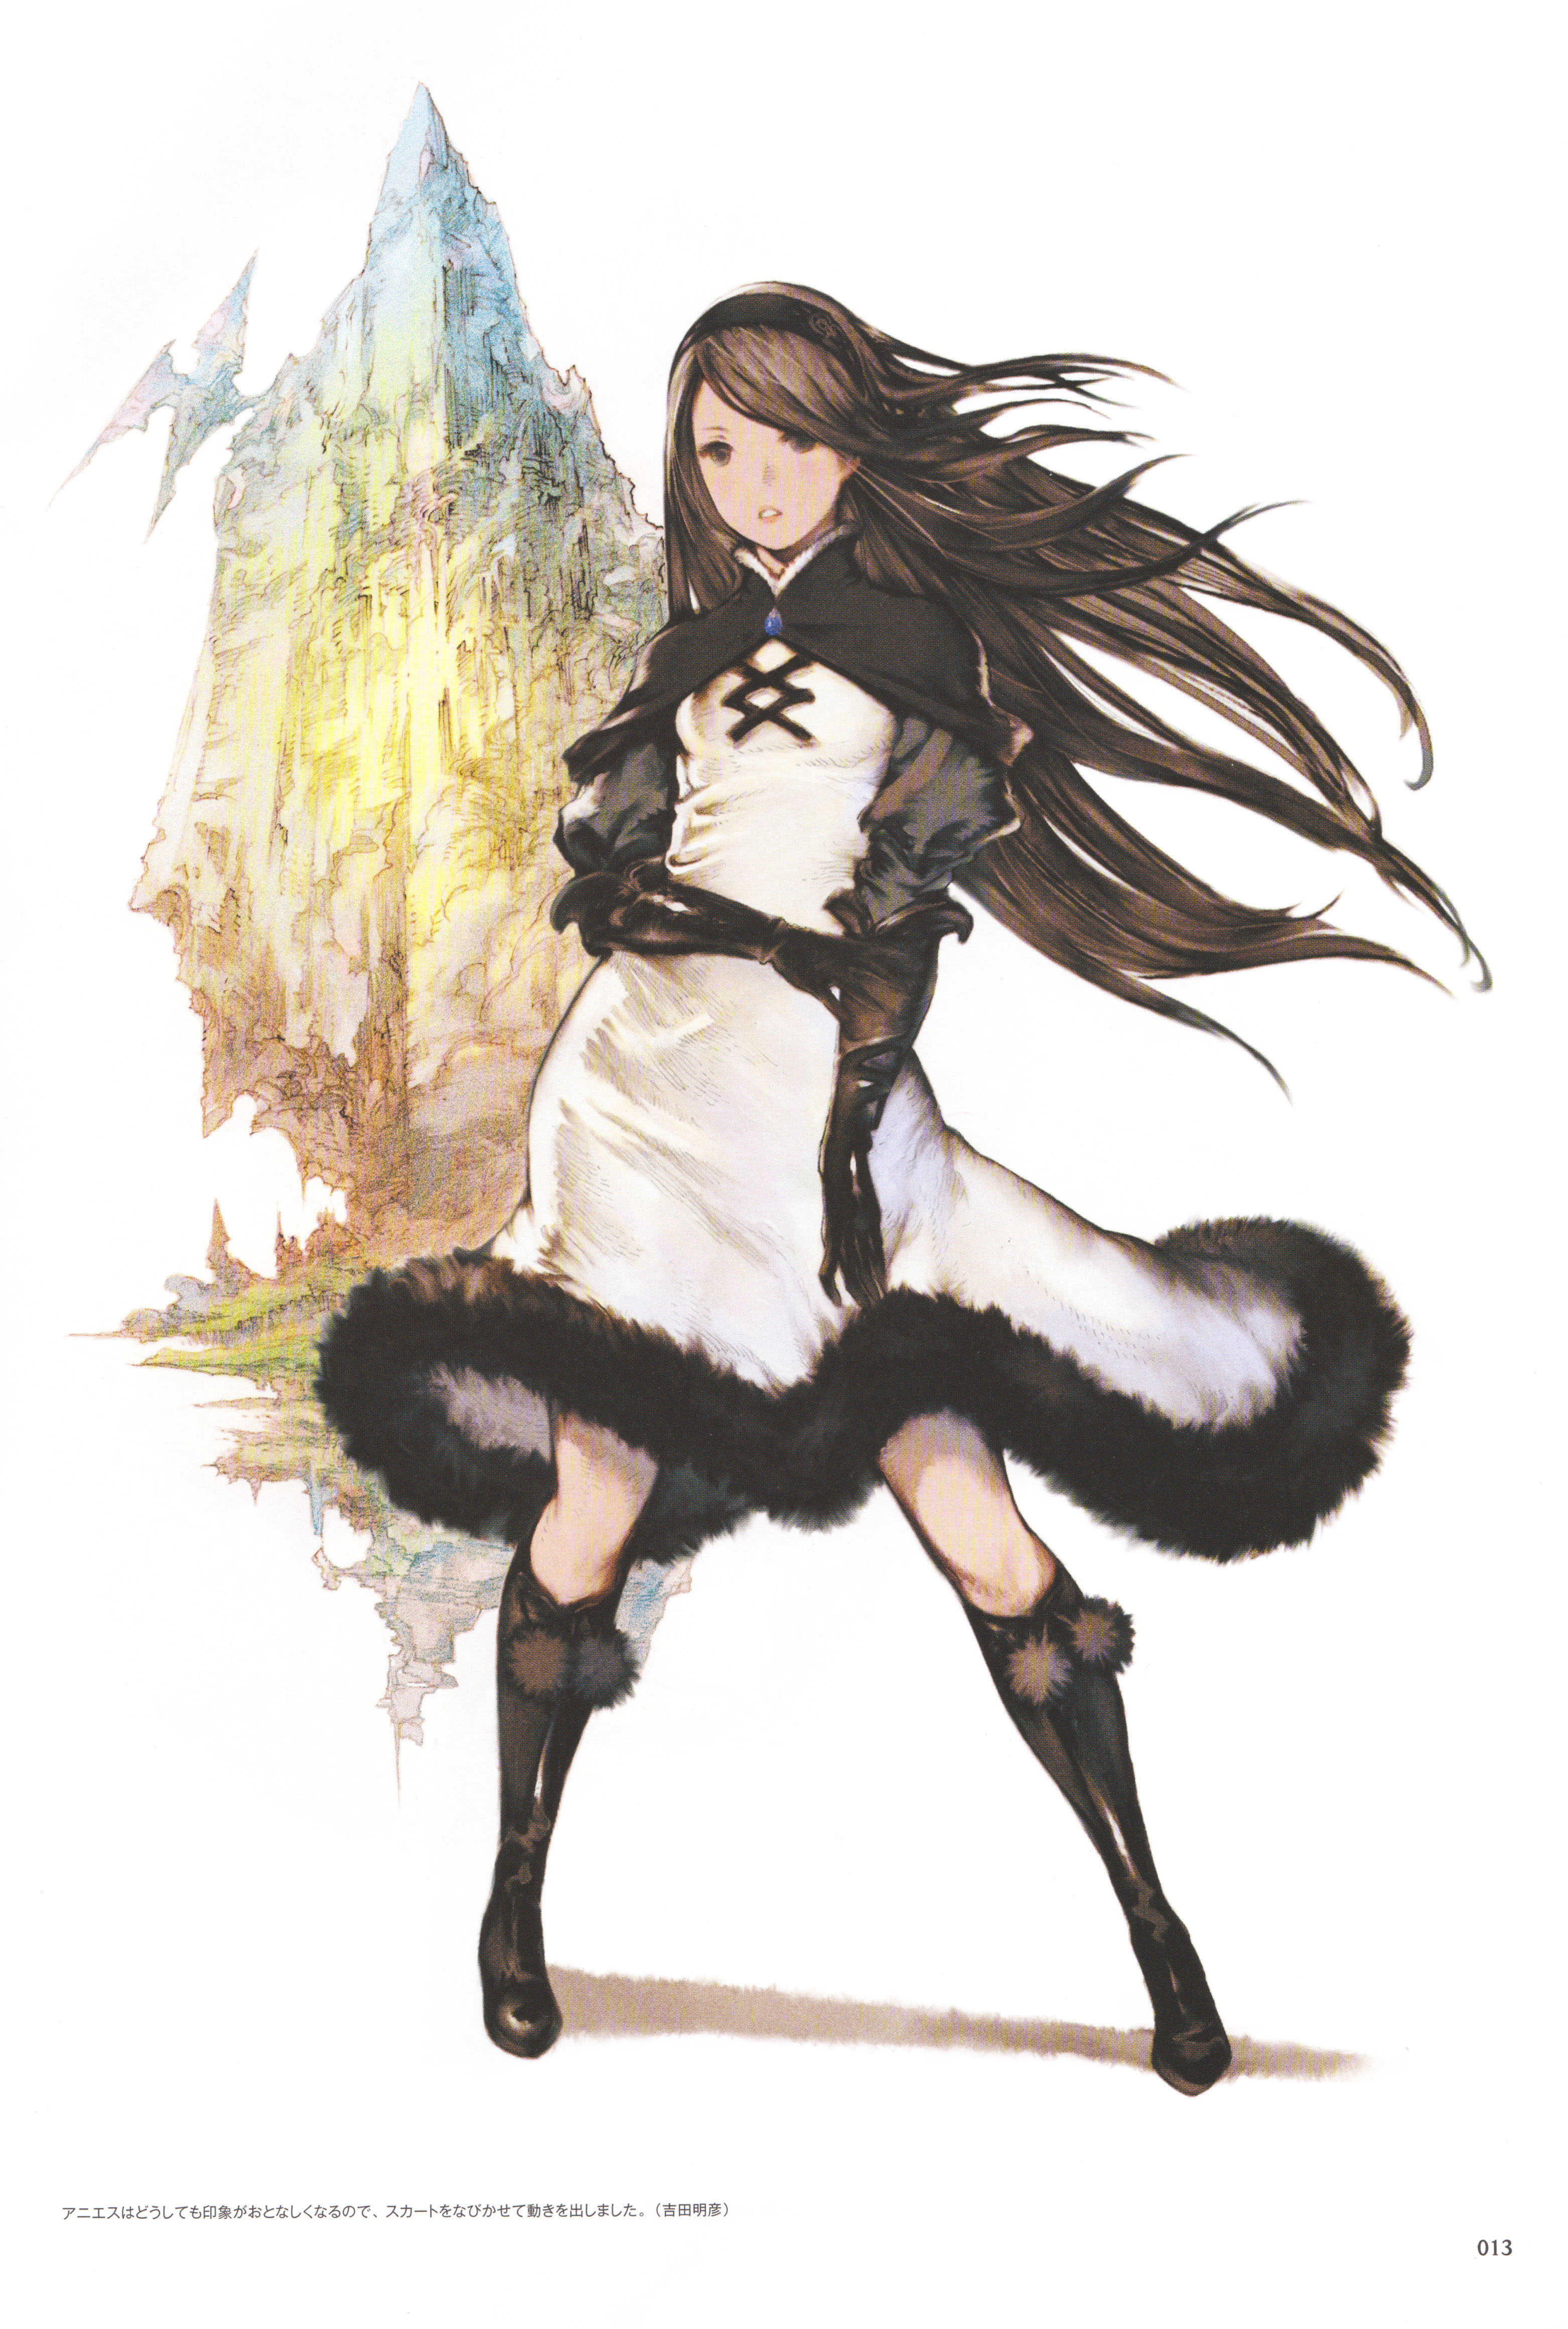 Bravely Default - Art Of Bravely Second End Layer - HD Wallpaper 